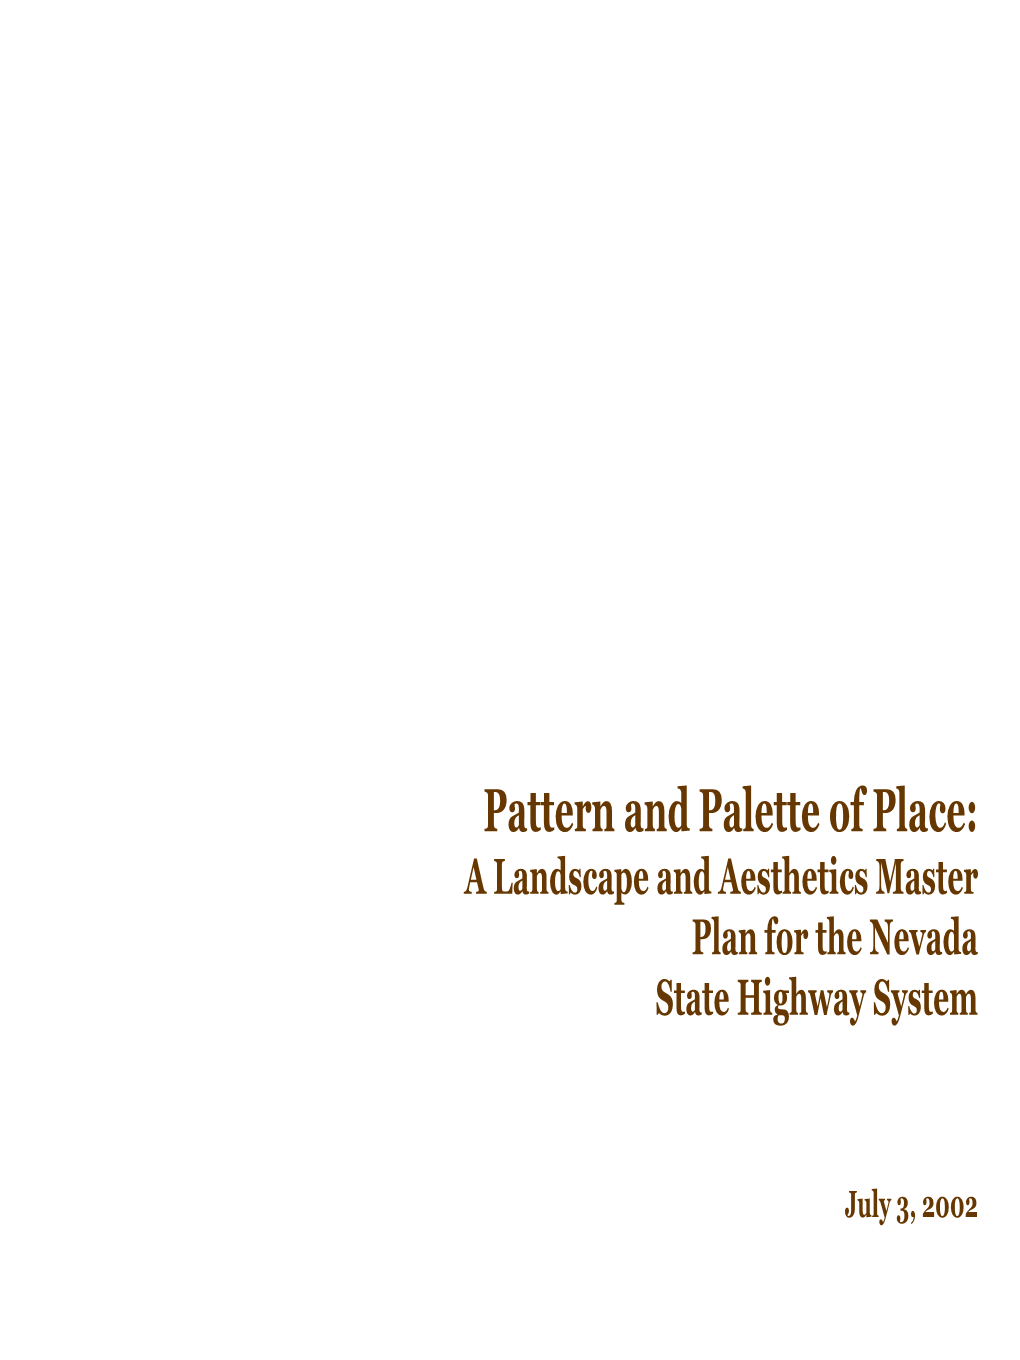 Pattern and Palette of Place: a Landscape and Aesthetics Master Plan for the Nevada State Highway System